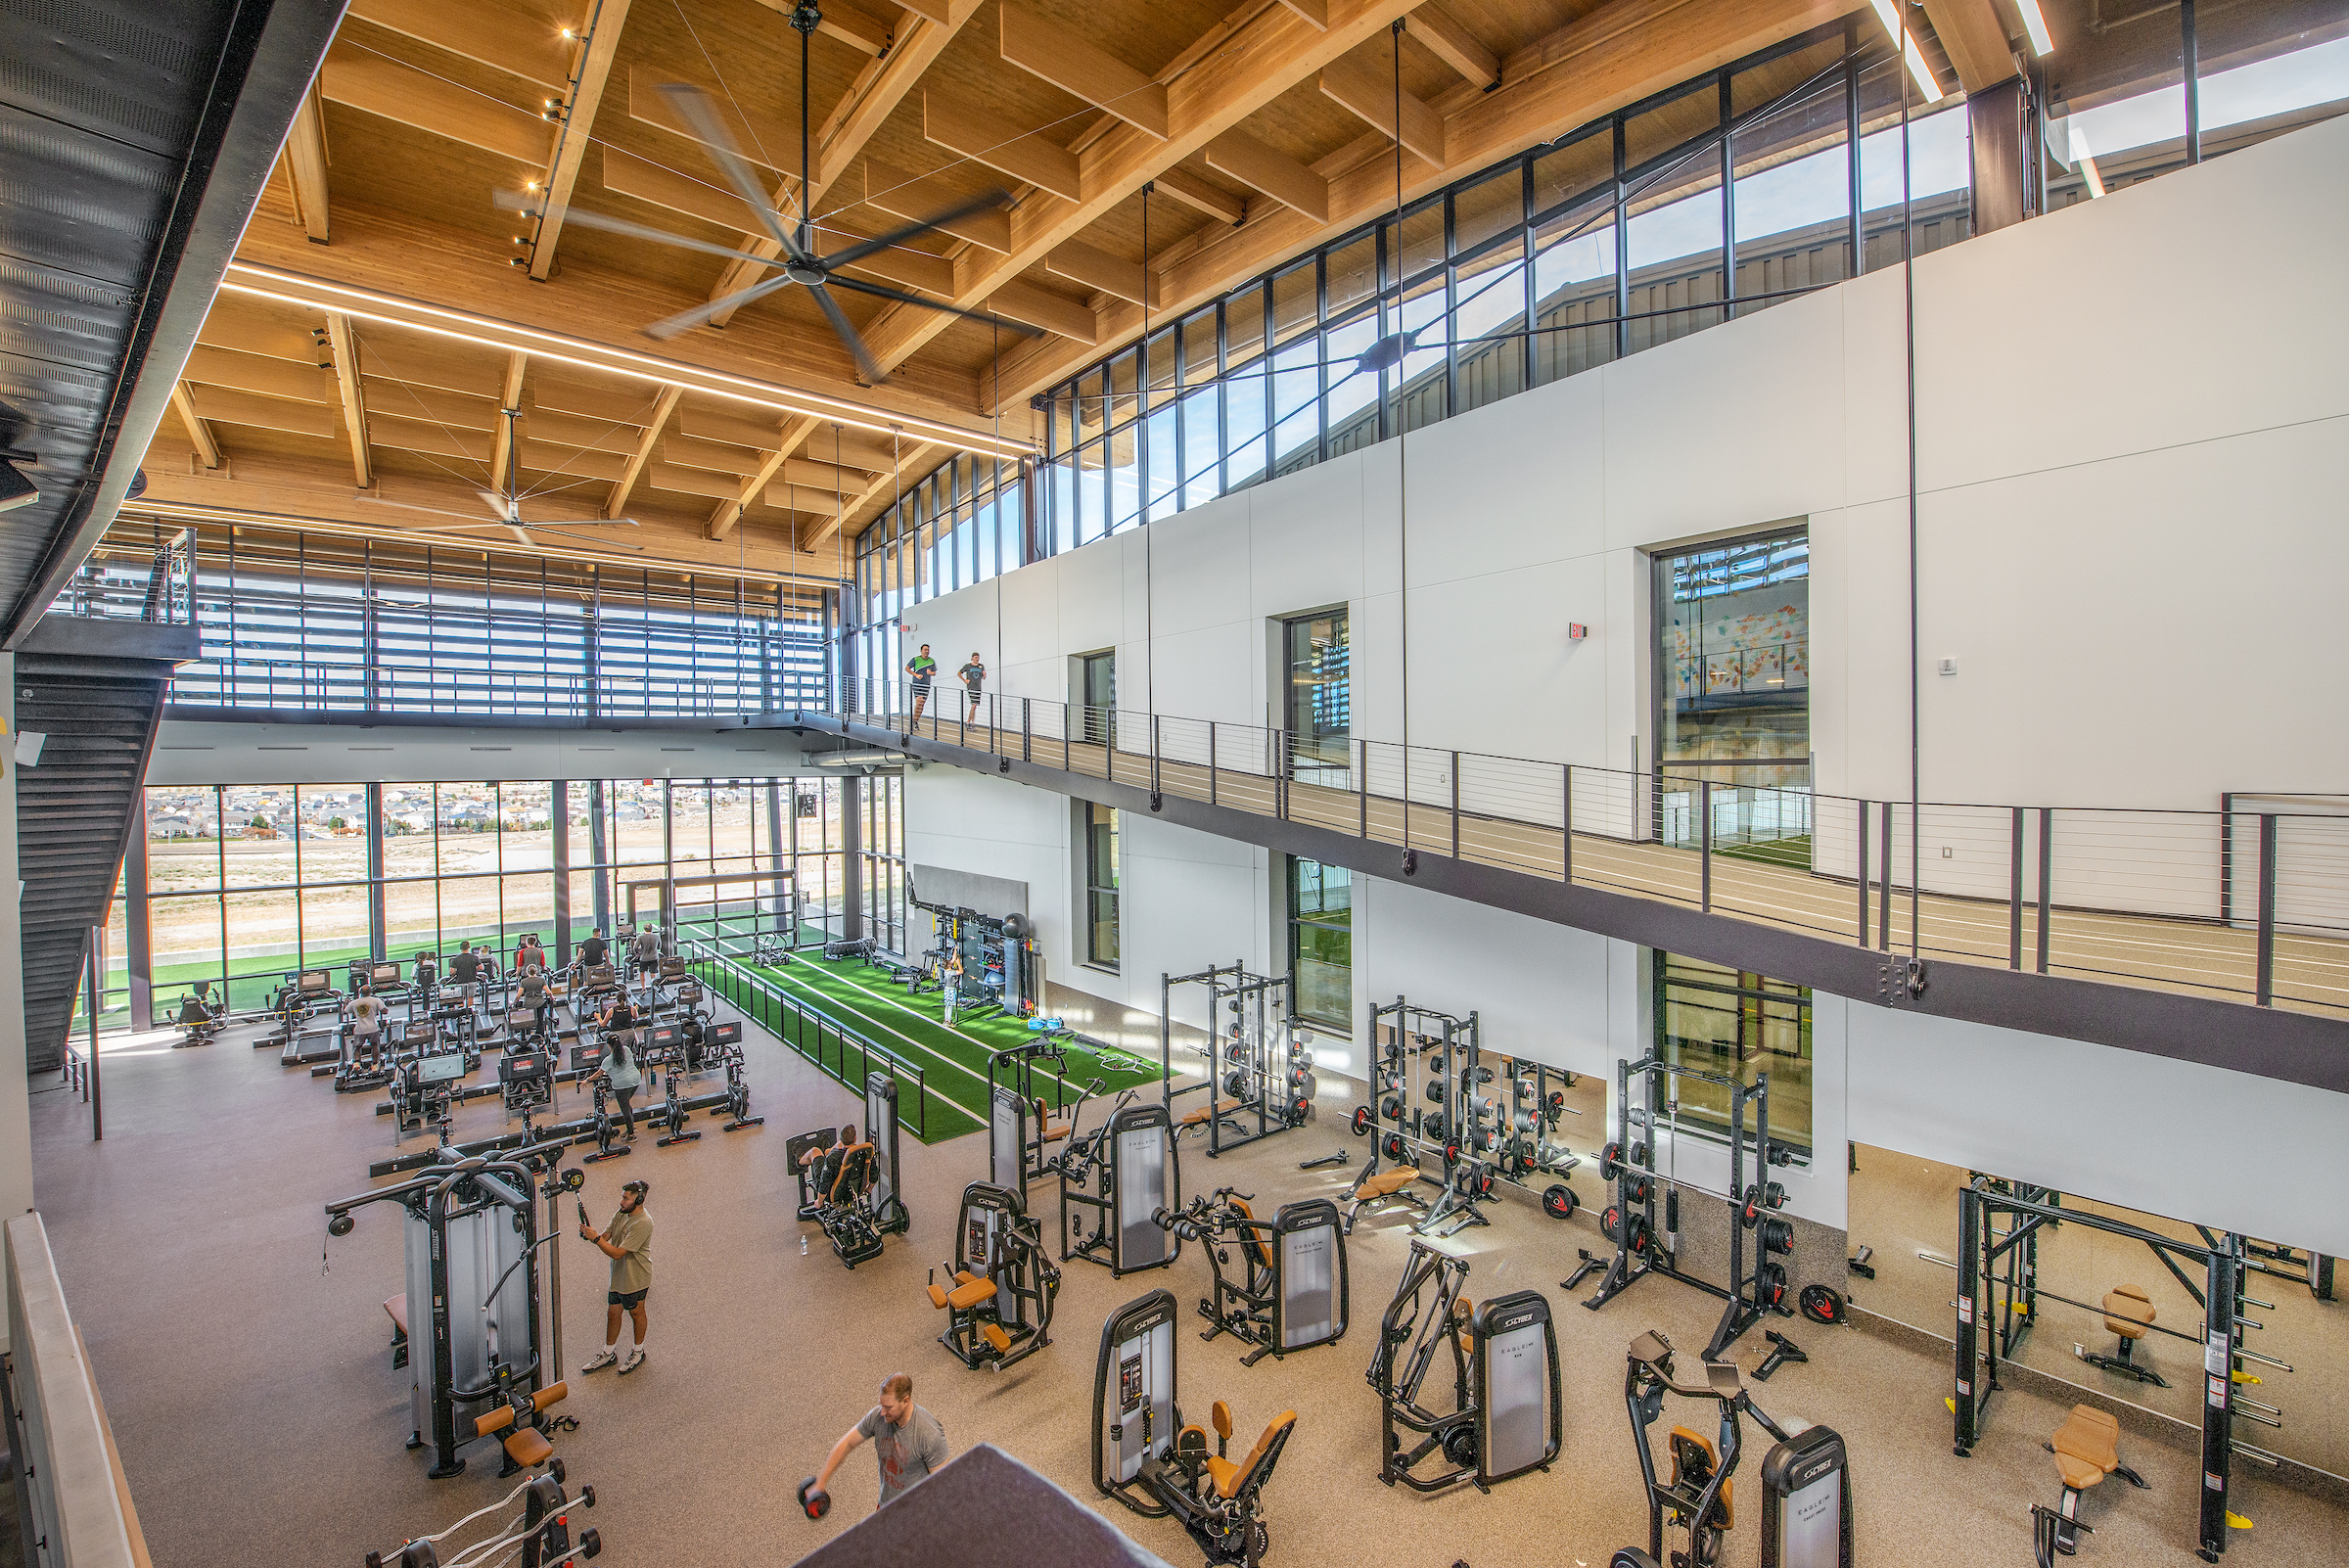 Aurora, Colo., recreation center features city’s first indoor field house, unobstructed views of the Rocky Mountains